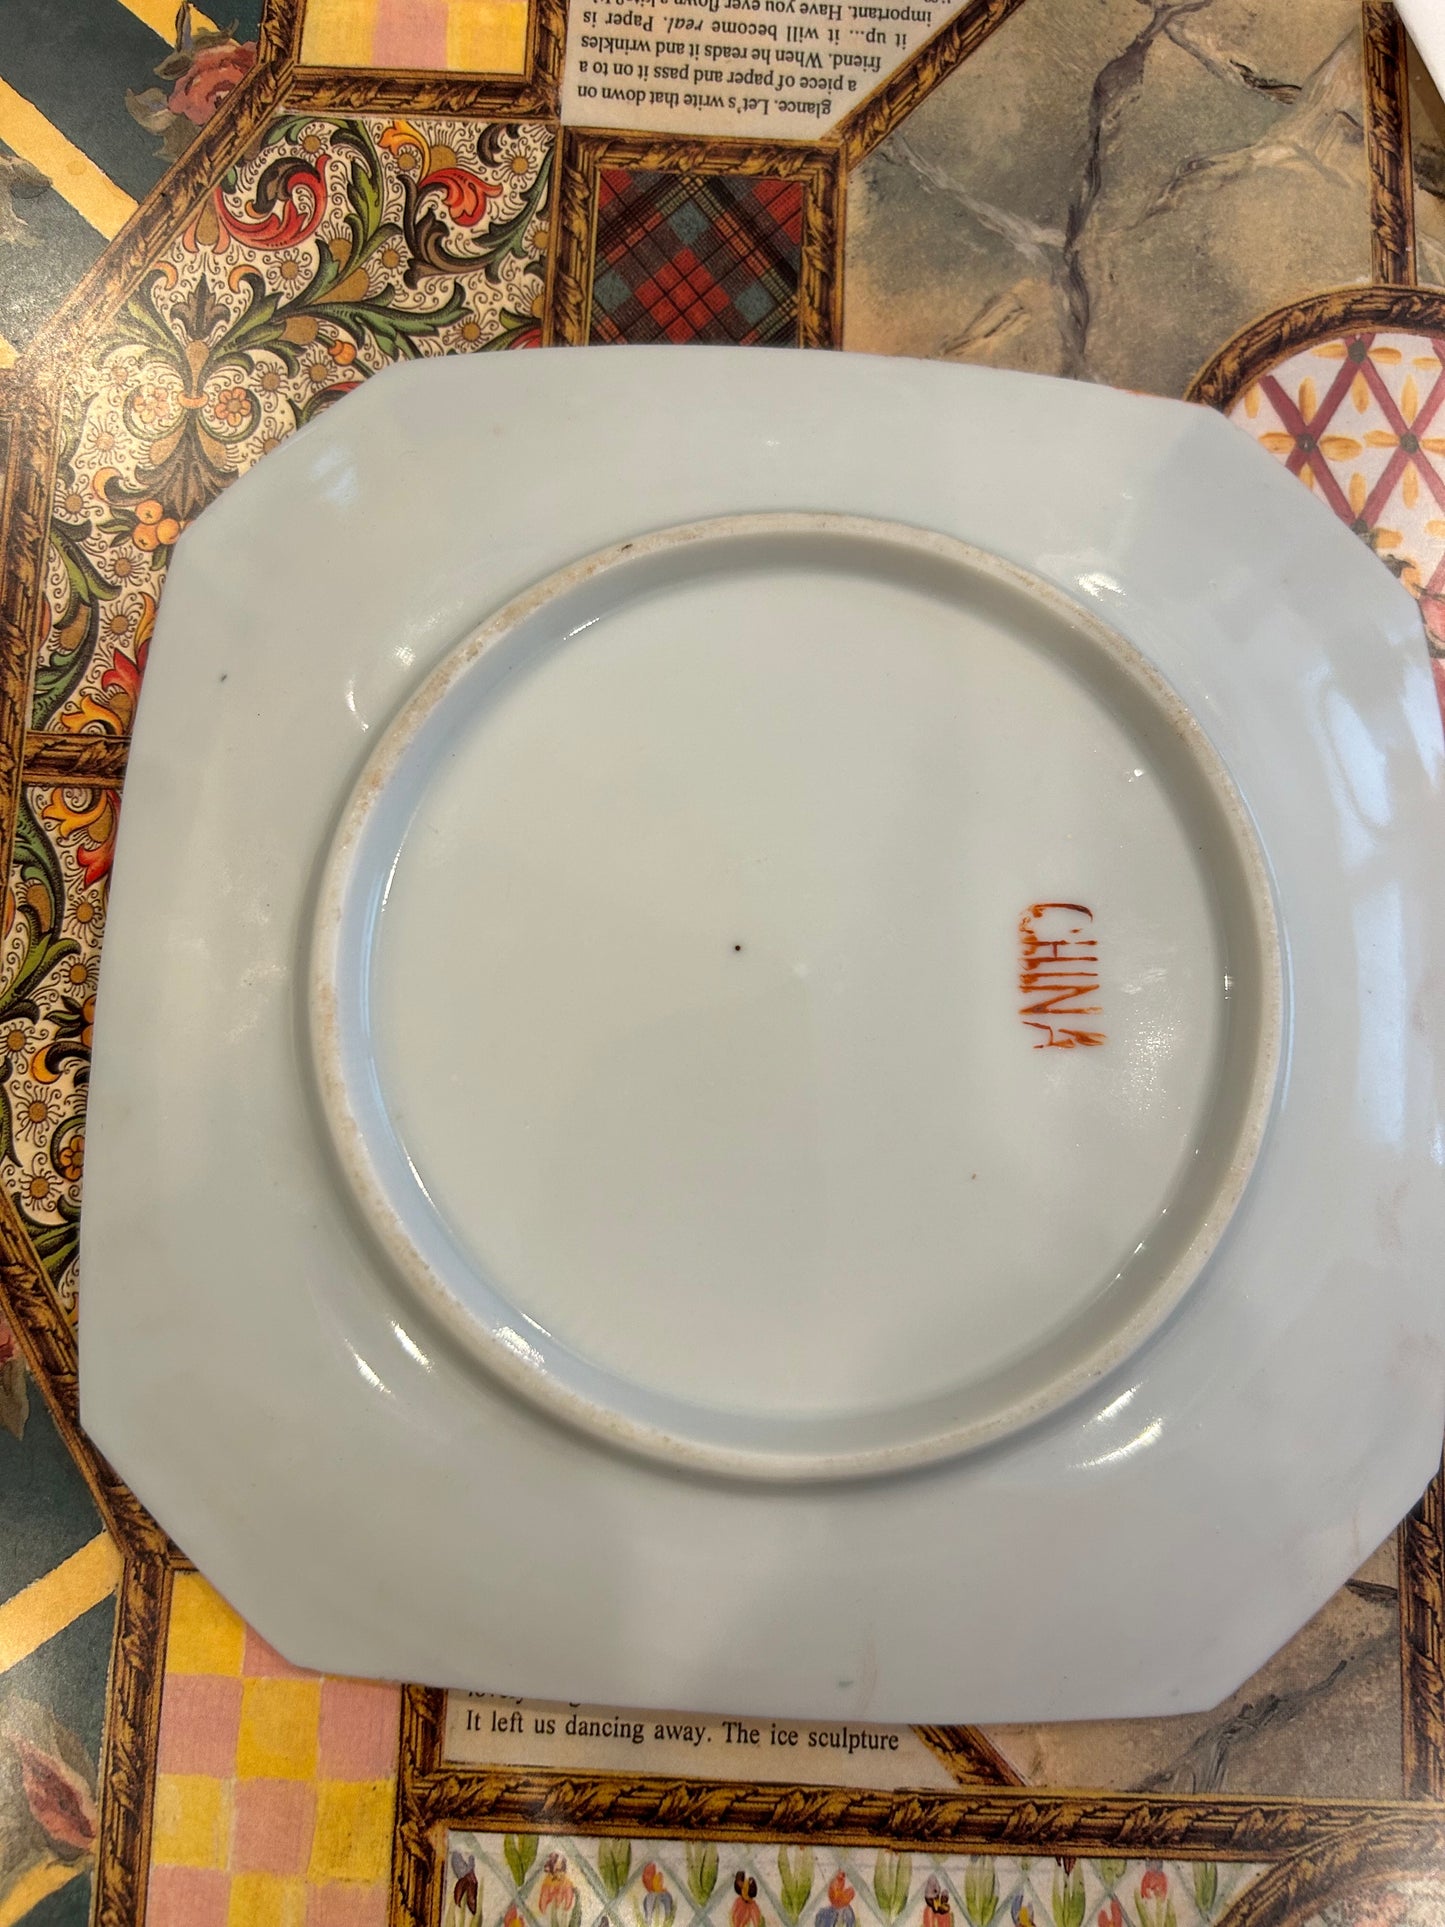 Antique Octagon Shaped Chinese Rooster Plate